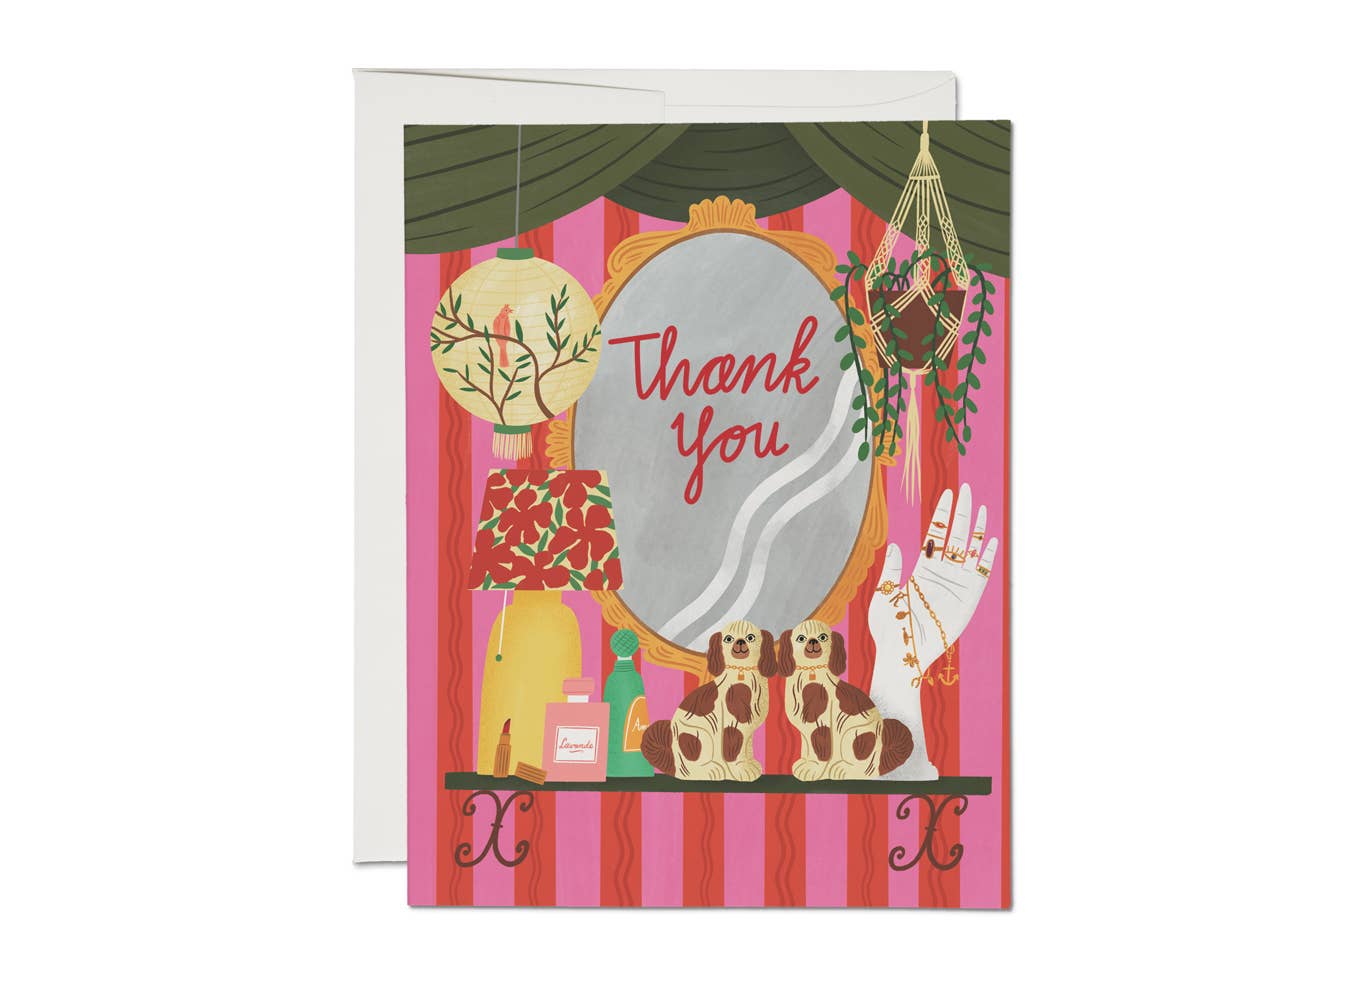 Load image into Gallery viewer, Mirror Mirror thank you greeting card
